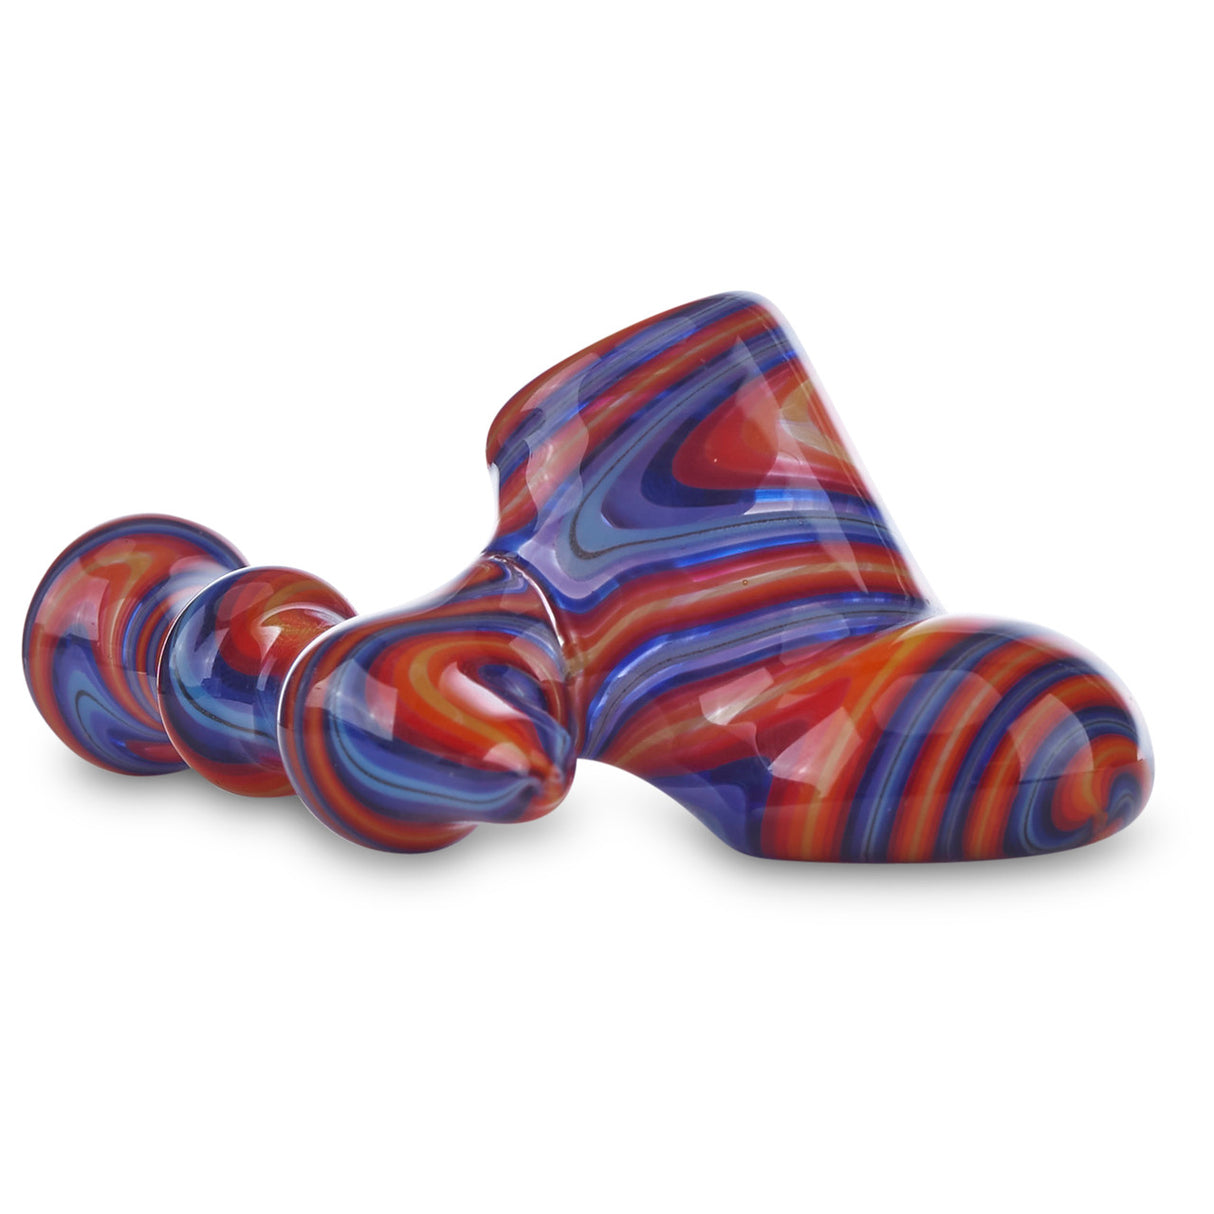 andy g mini sherlock pipe for smoking dry herbs and tobaccos